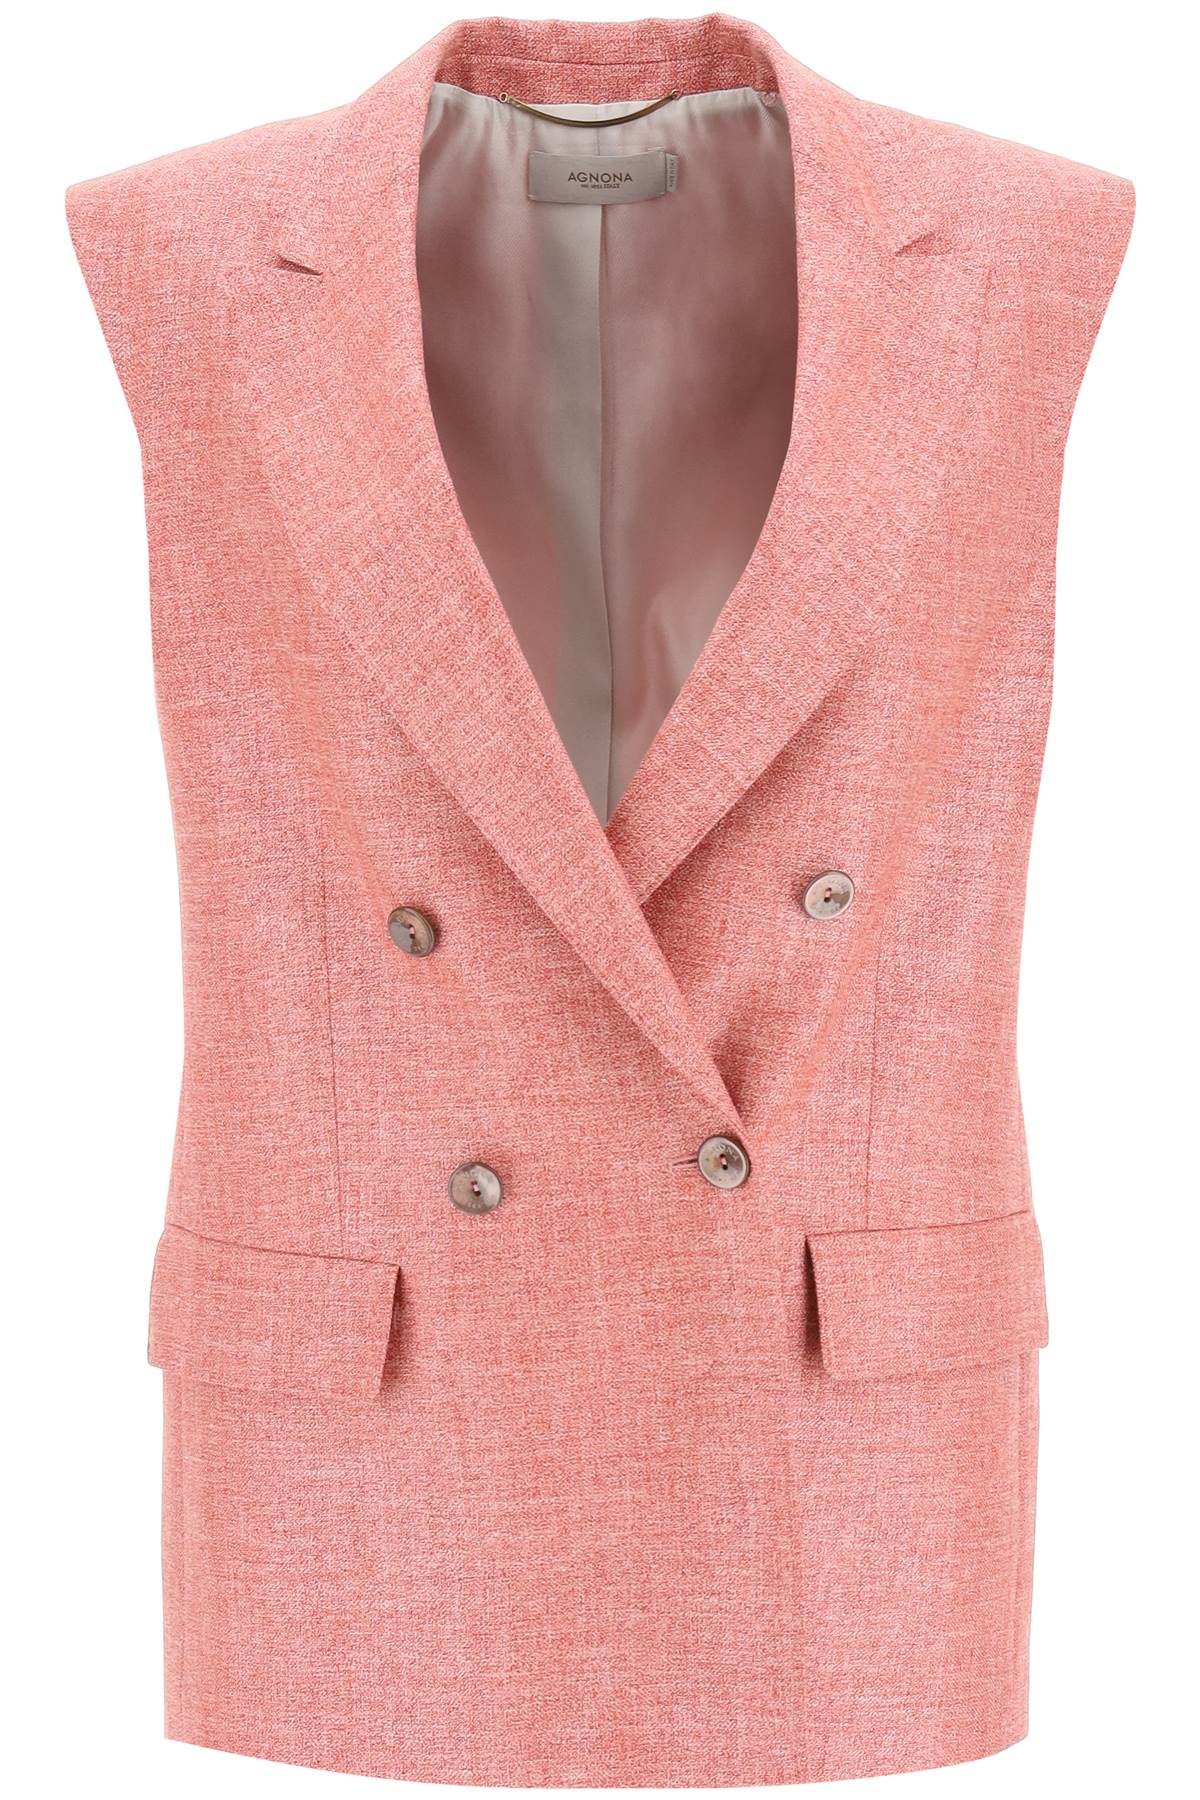 AGNONA DOUBLE-BREASTED waistcoat IN SILK, LINEN AND WOOL